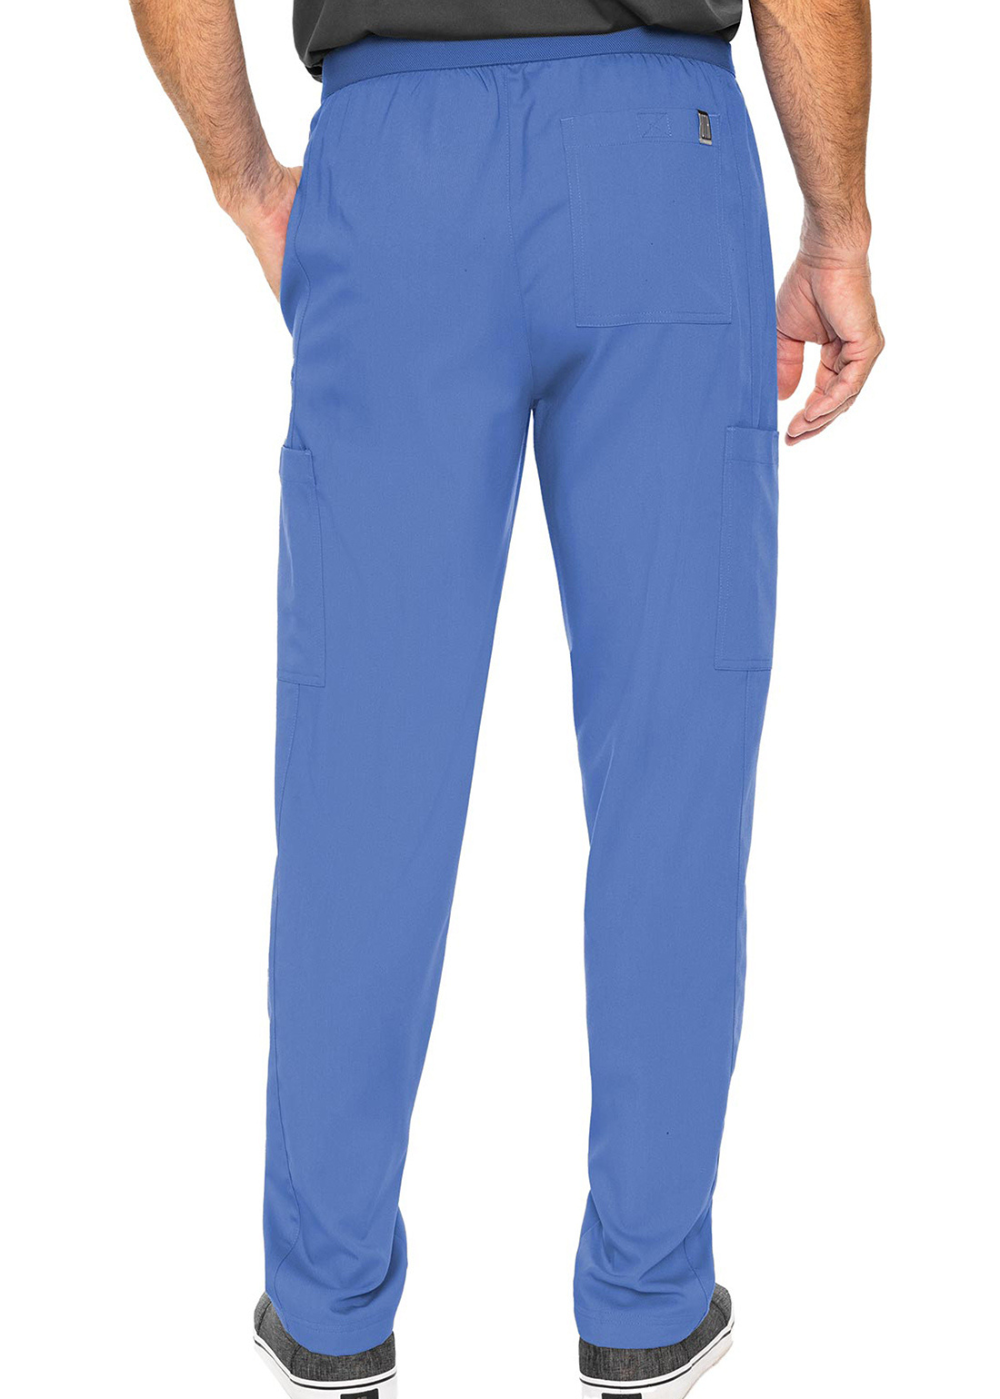 ROTH Wear Men's TOUCH 7779 Hutton Straight Leg Pant